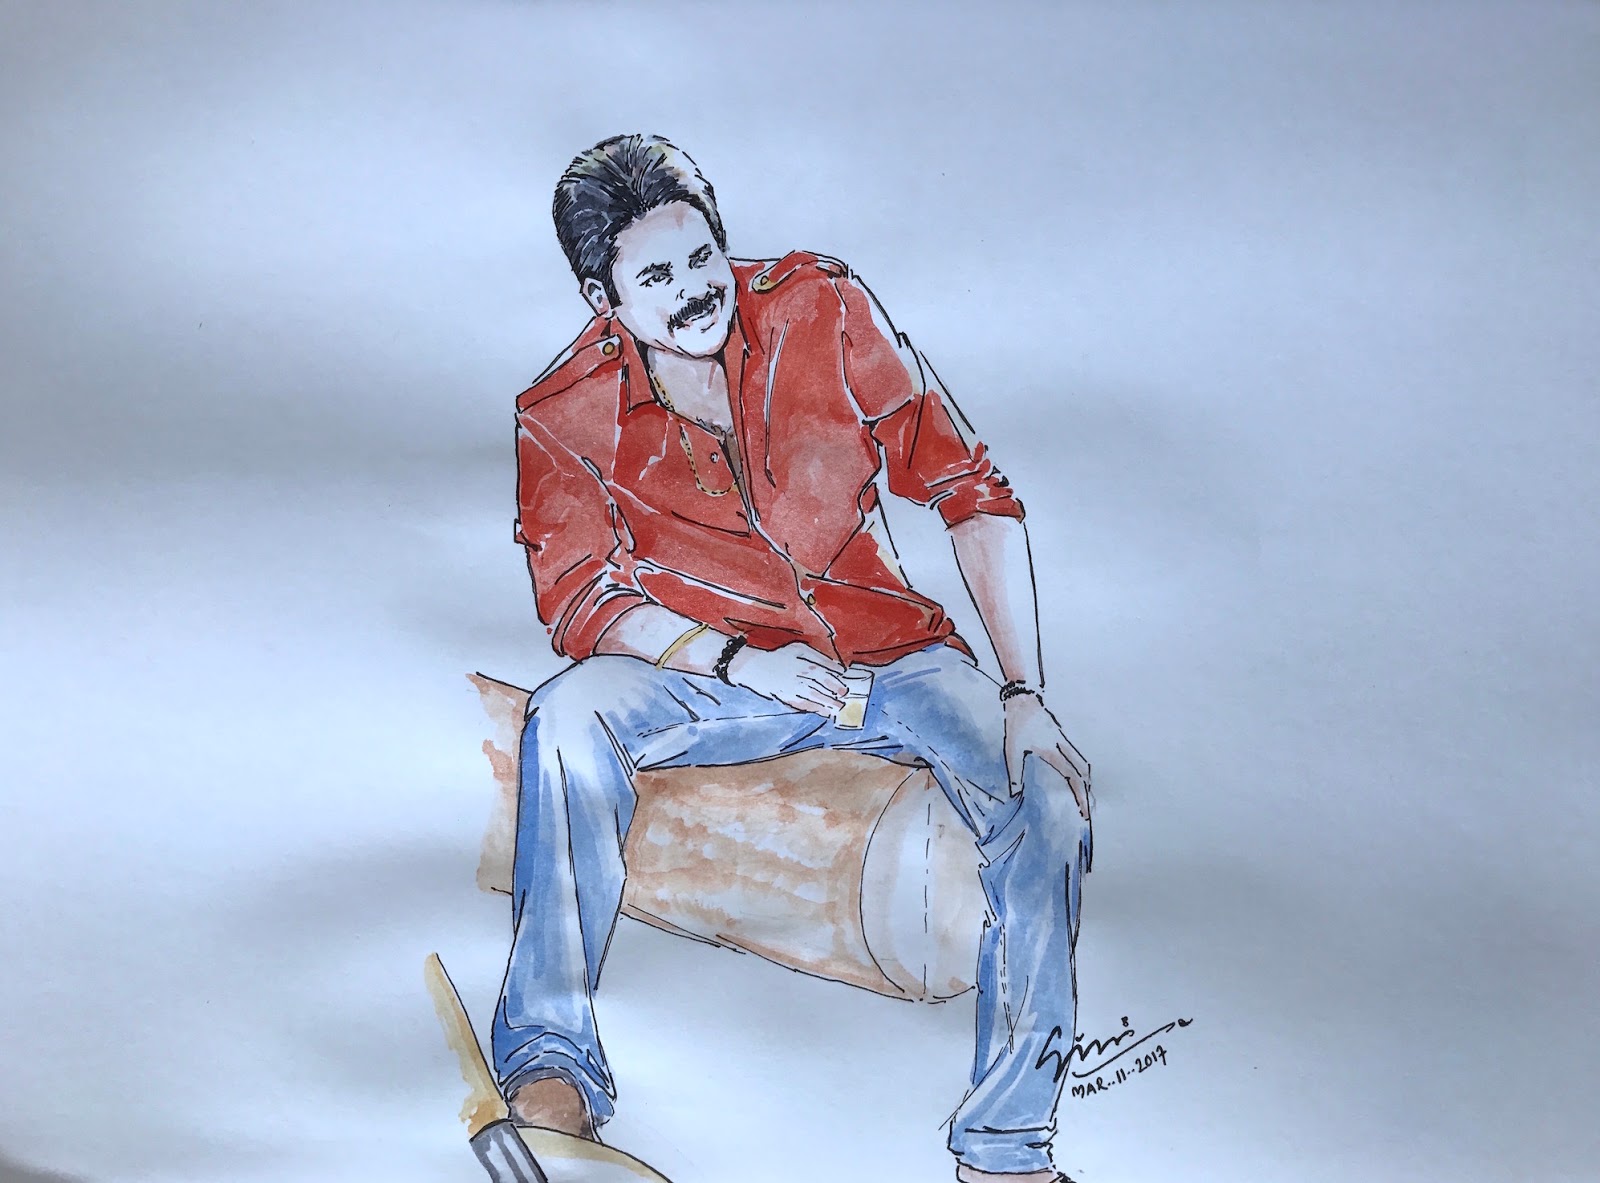 Online Center Superstar Actor Pawan Kalyan HD Wall Poster Multicolor Print  (Vinyl Sticker Poster 18x24 Inches) Paper Print - Movies posters in India -  Buy art, film, design, movie, music, nature and